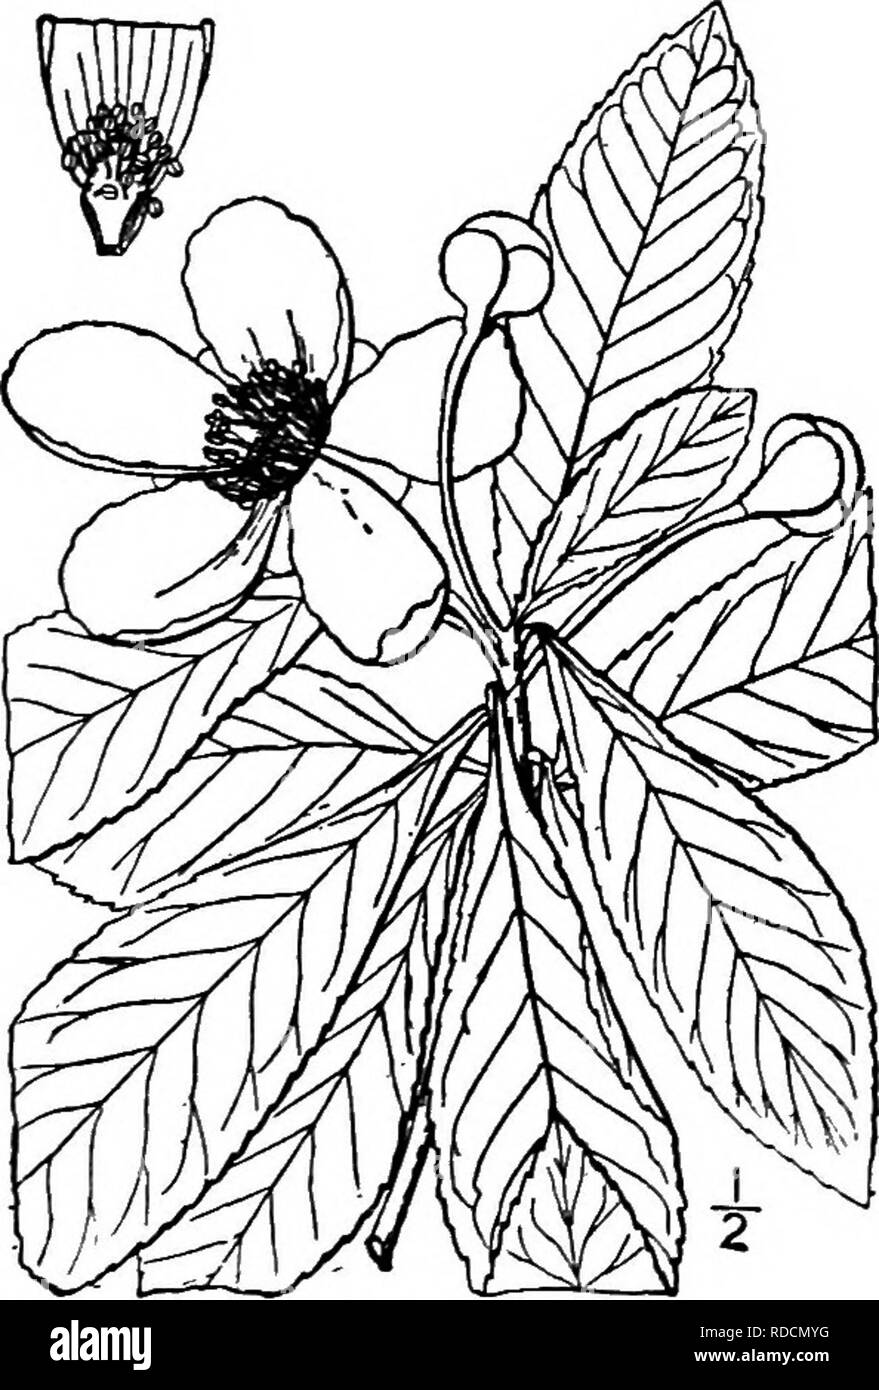 . North American trees : being descriptions and illustrations of the trees growing independently of cultivation in North America, north of Mexico and the West Indies . Trees. Loblolly Bay 705 II. LOBLOLLY BAY GENUS GORDOHIA ELLIS Species Gordonia Lasianthns (Linnaeus) Ellis Hypericum Lasianthus Linnaeiis LSO called Tan bay, this is a large evergreen tree of the southeastern States, ranging from southern Virginia to Florida and Louisiana, near the coast; it reaches a maximum height of 25 meters, with a trunk diameter of 5 dm., usually much smaller and sometimes shrubby. The trunk is usually str Stock Photo